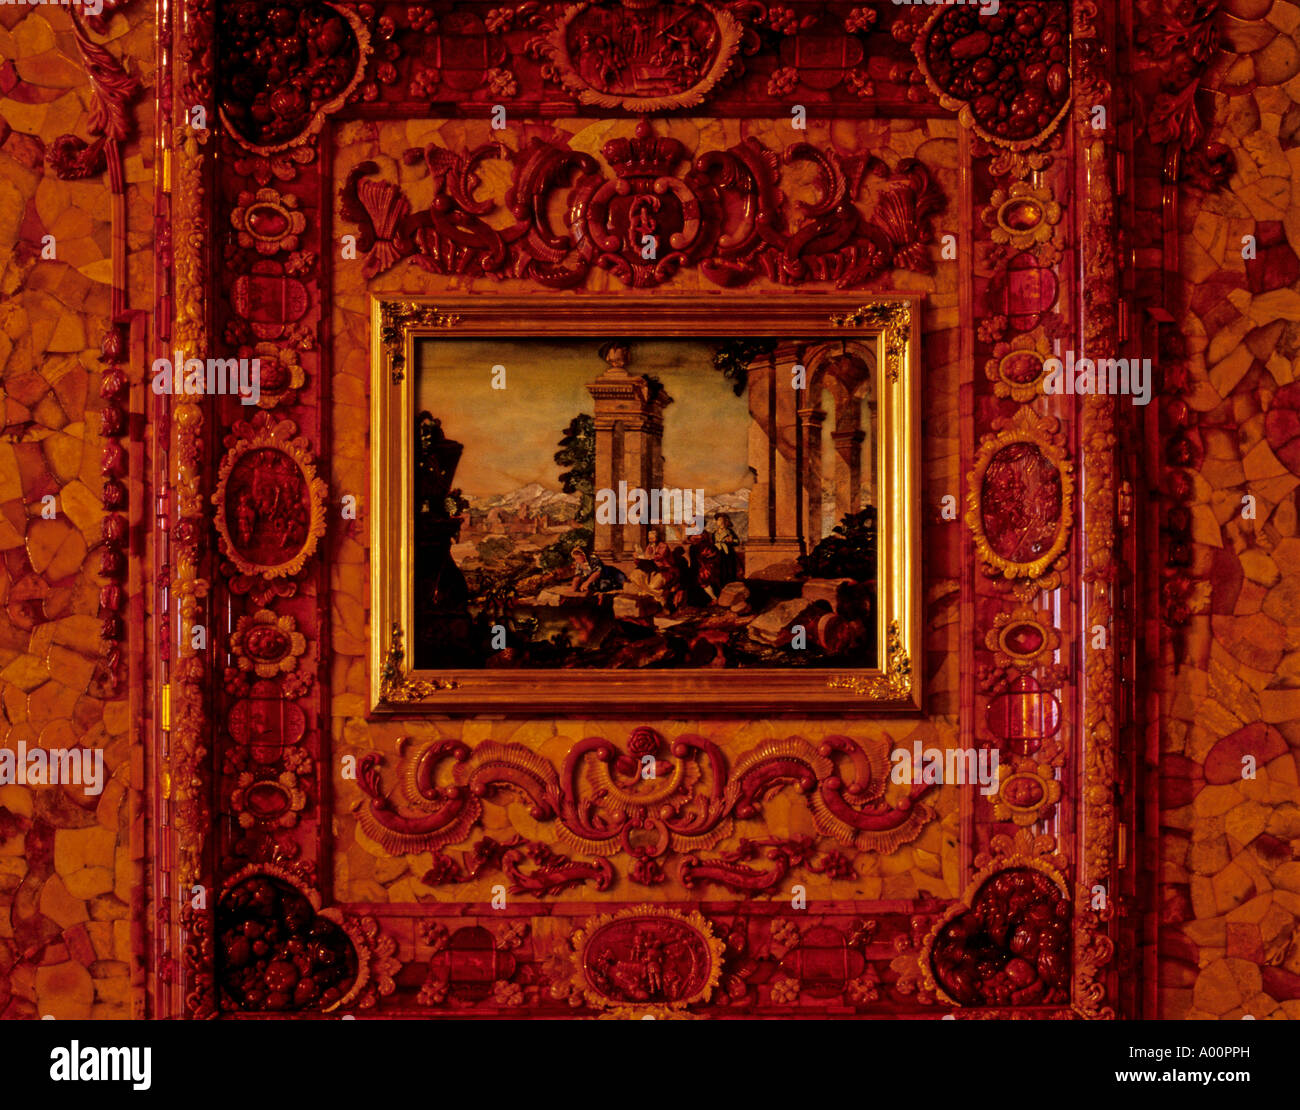 DETAIL AMBER ROOM CATHERINE PALACE ST PETERBURG RUSSIA Stock Photo